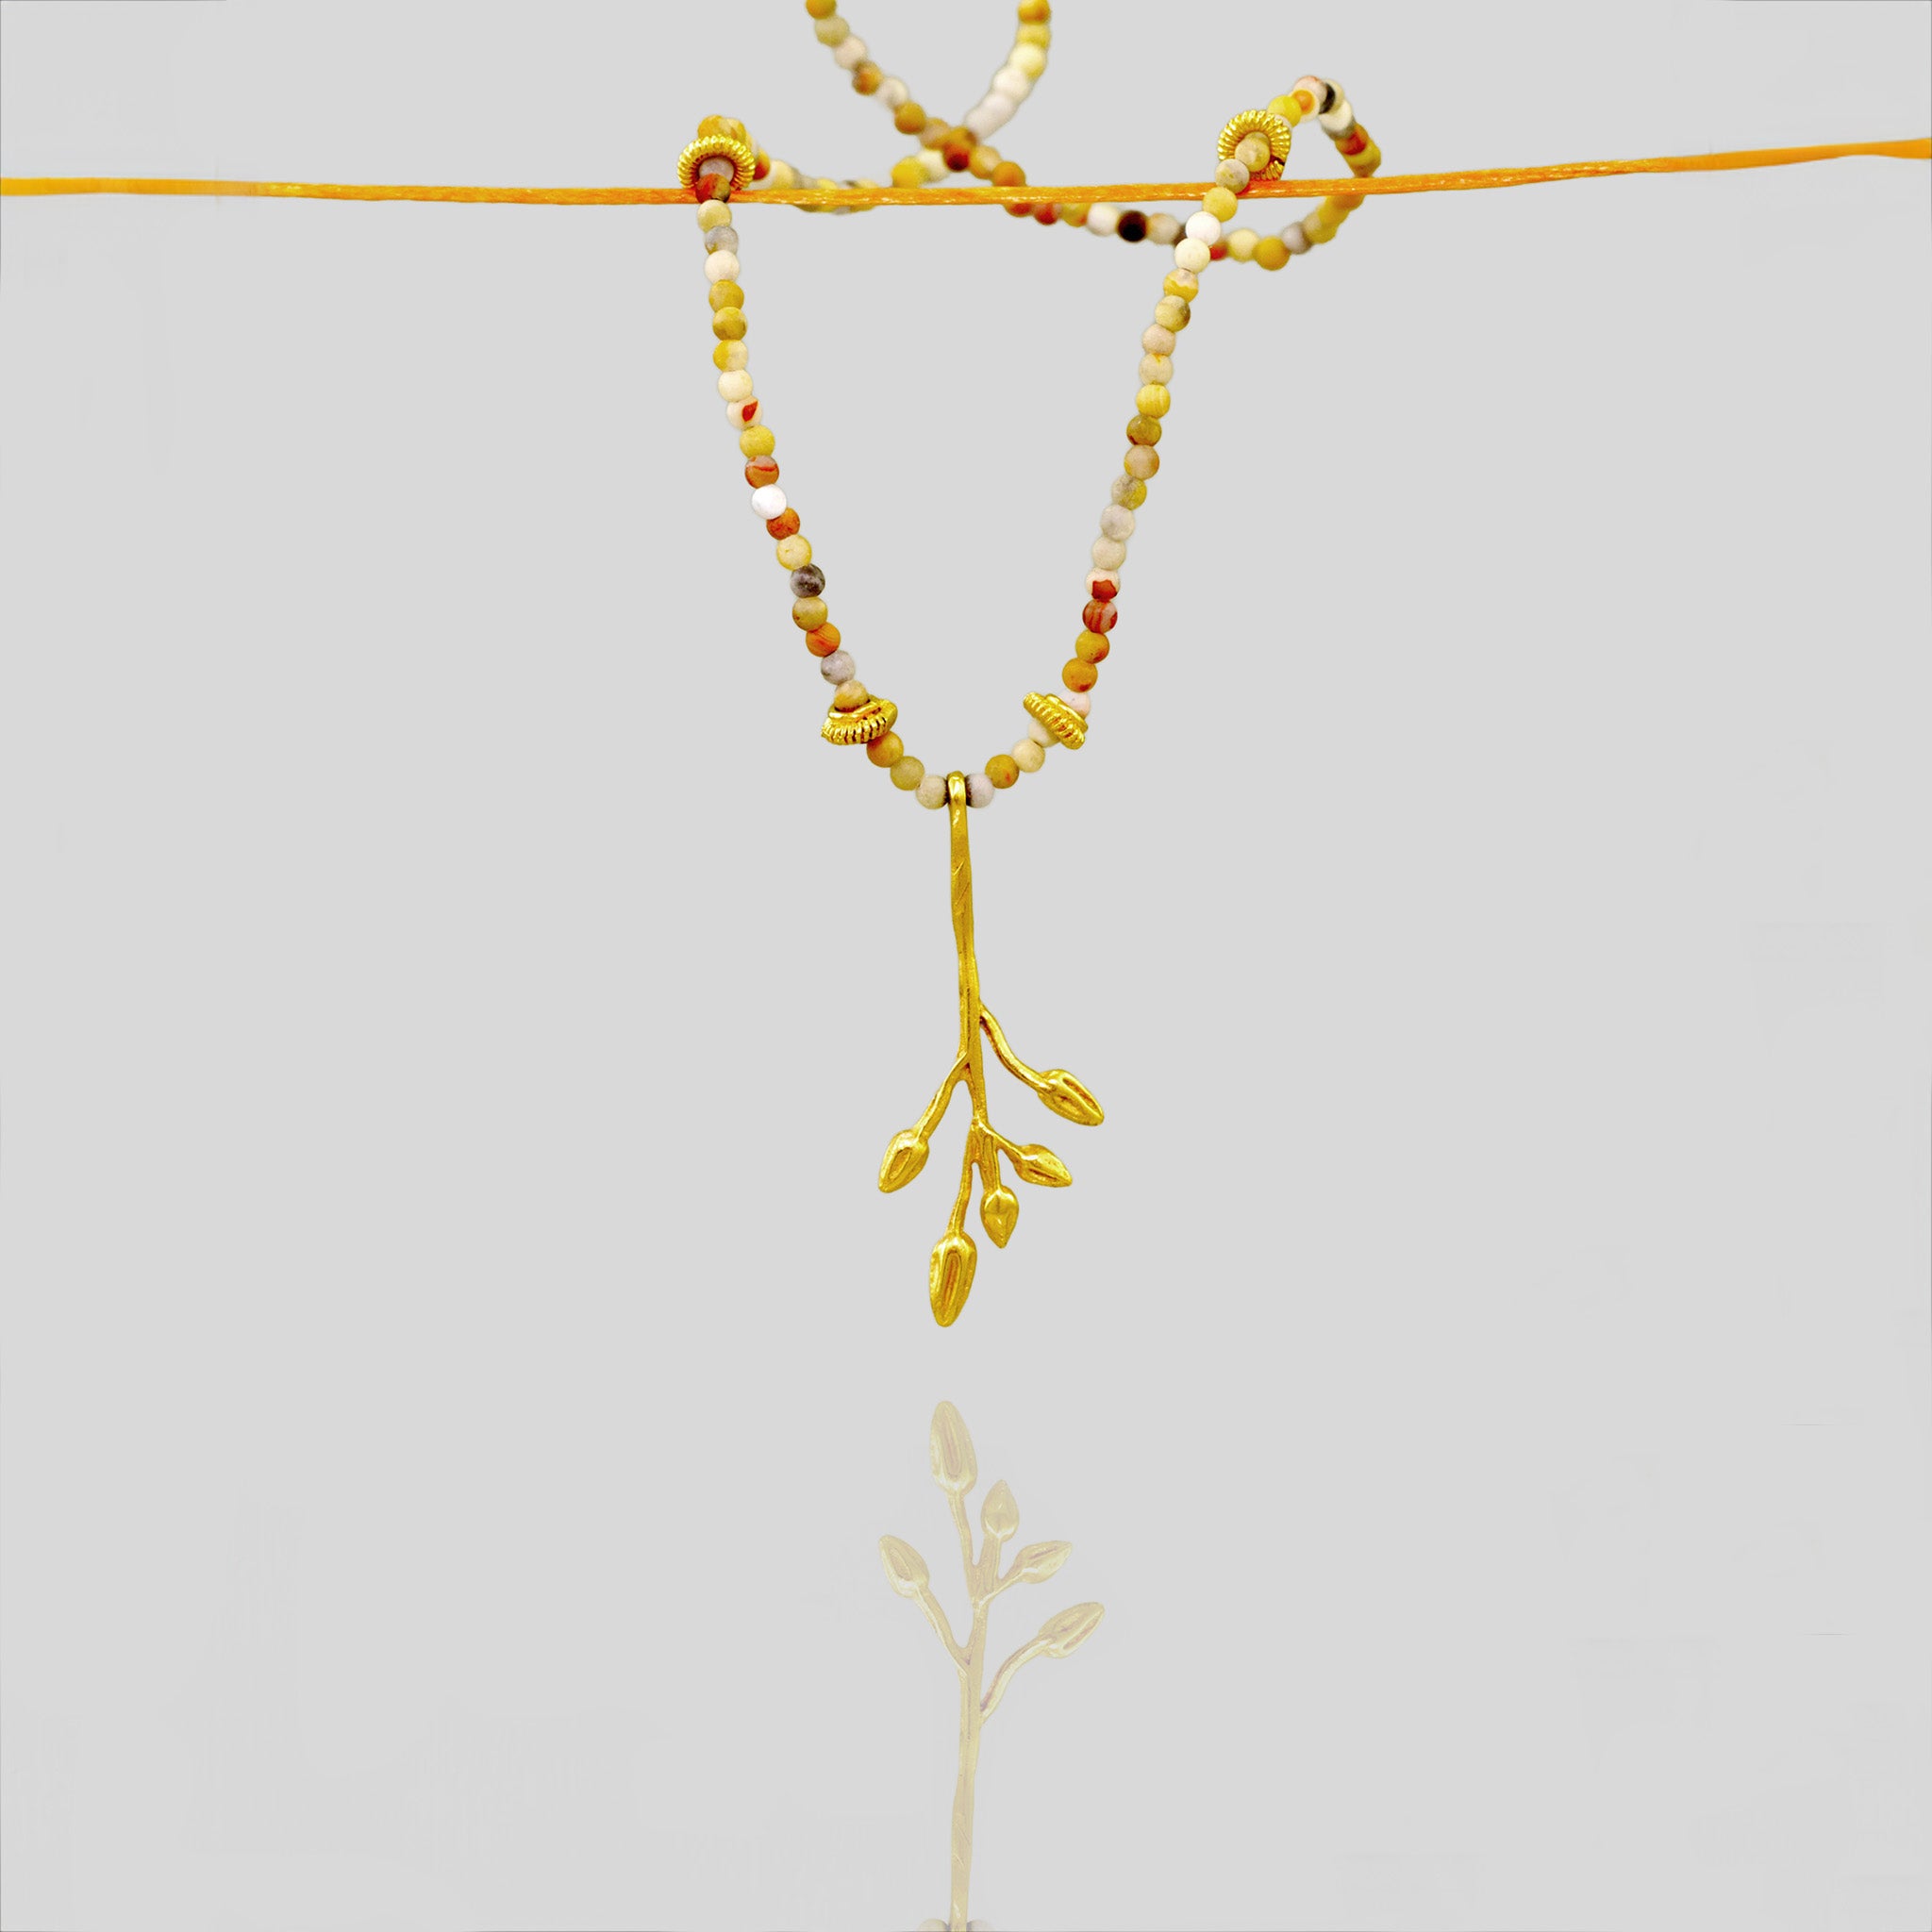 Delicate yellow gold pendant designed to resemble a branch with dried seed pods, adorned with Jasper stones and gold elements for a vibrant and natural look.